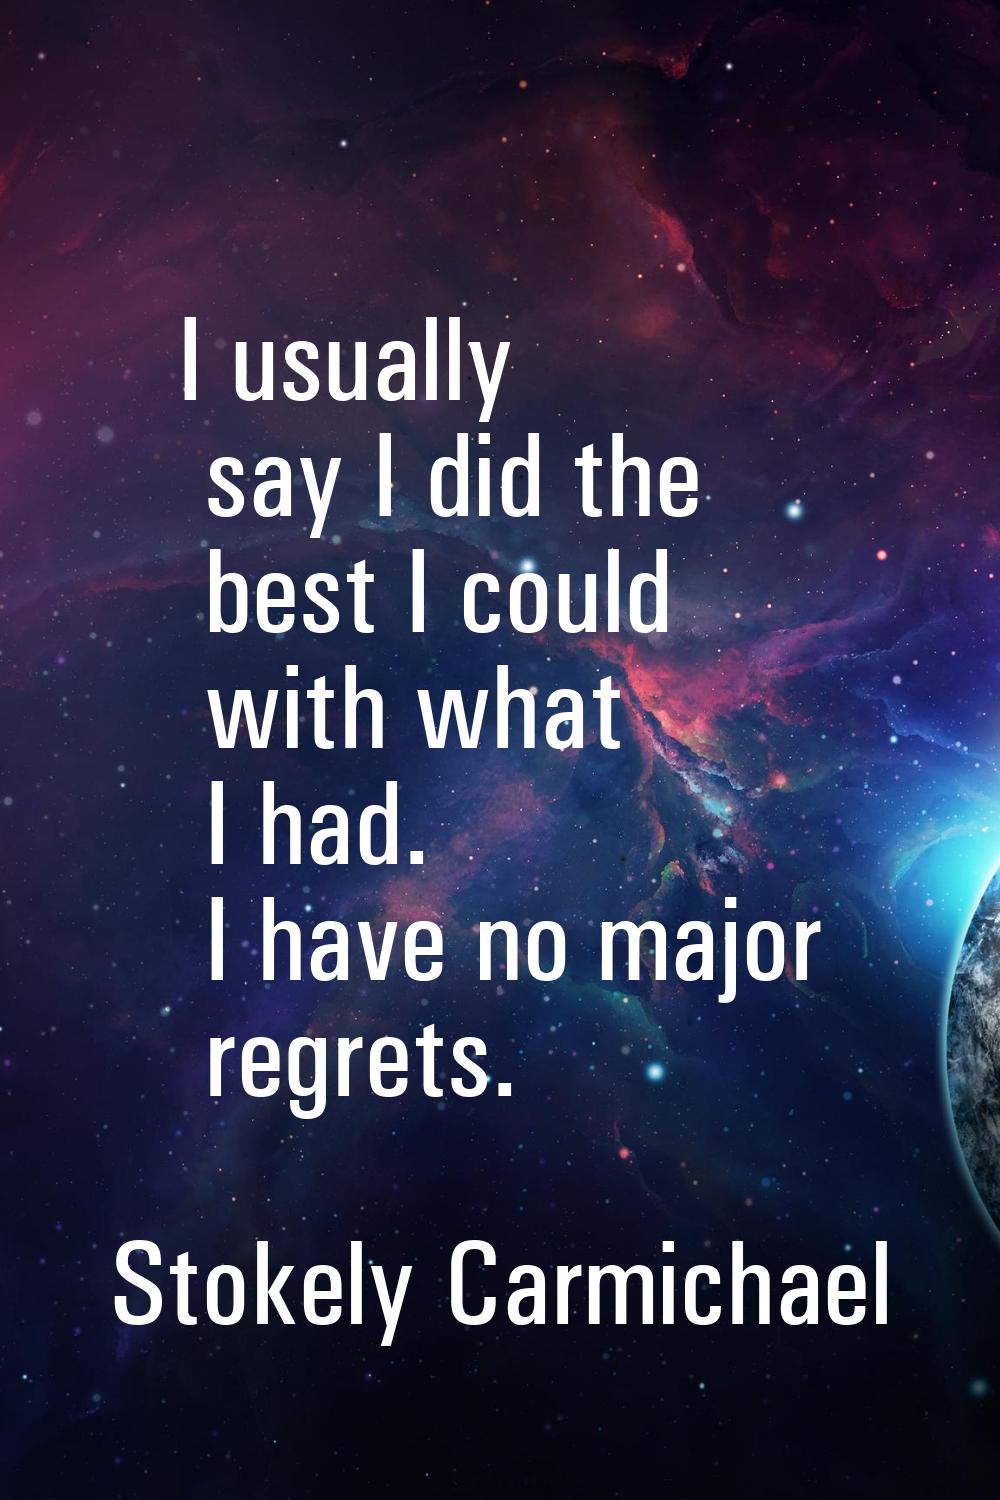 I usually say I did the best I could with what I had. I have no major regrets.